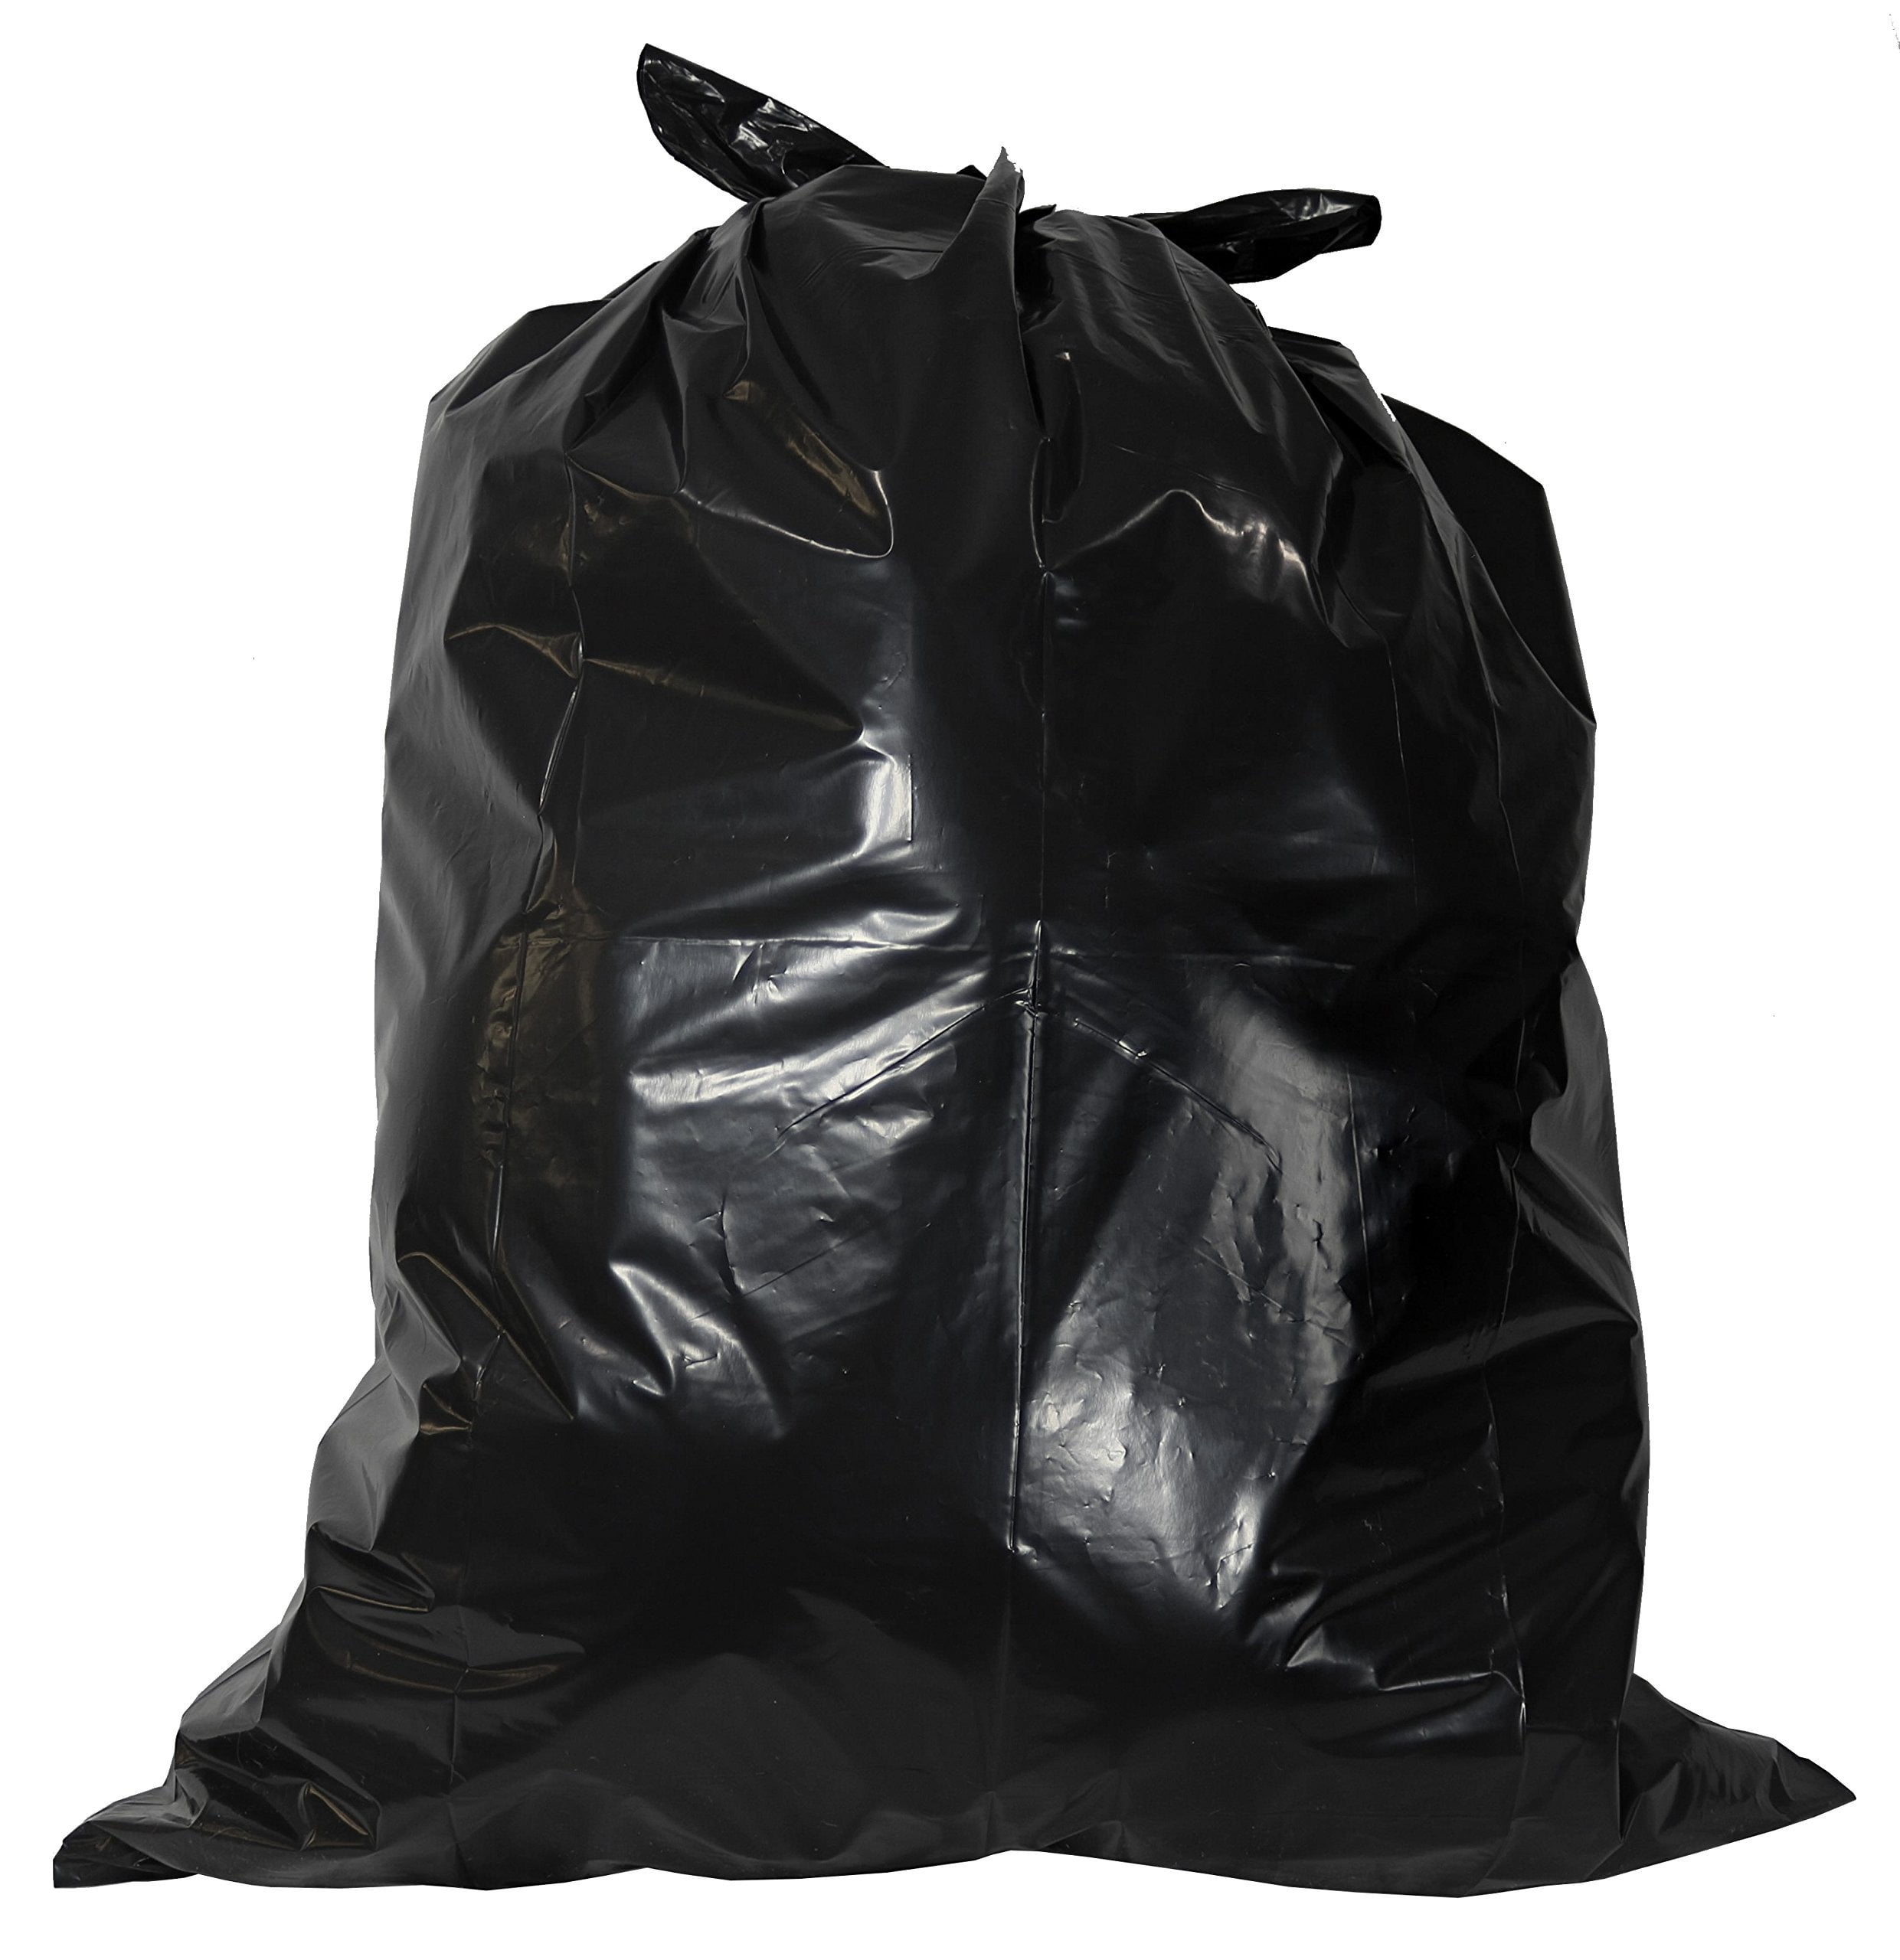 Nicole Home Collection Black Plastic Contractor Bags 42 Gal 1 Pack